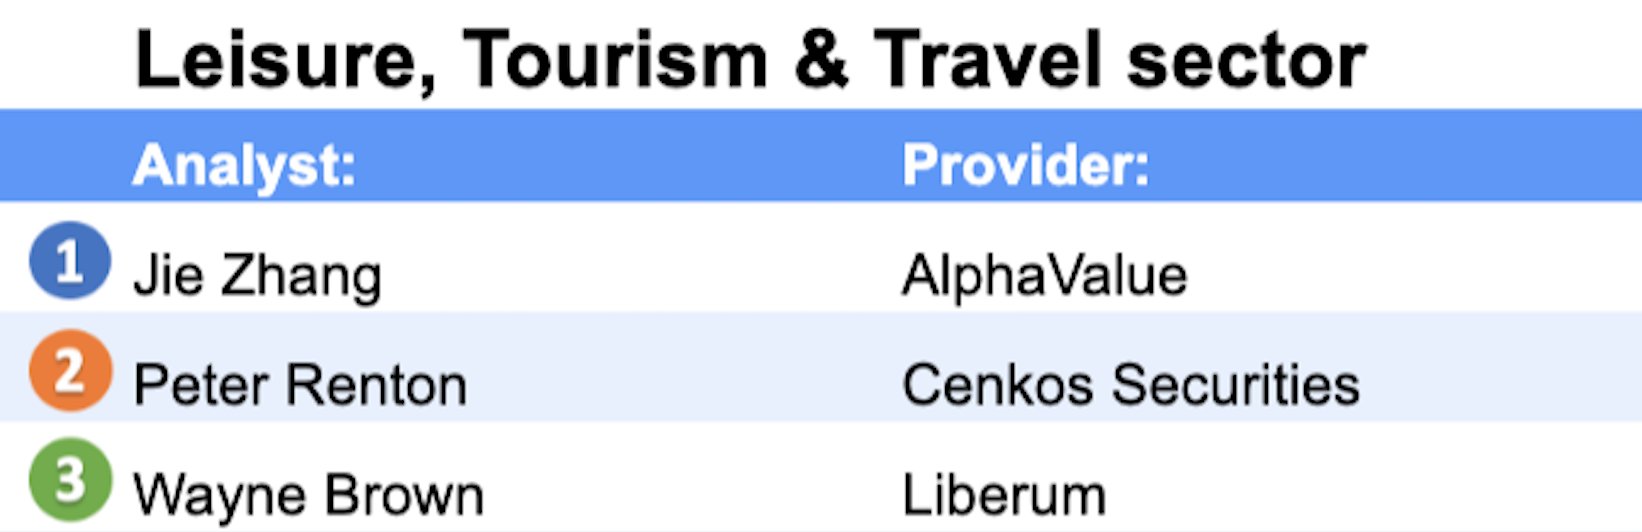 leisure tourism and travel